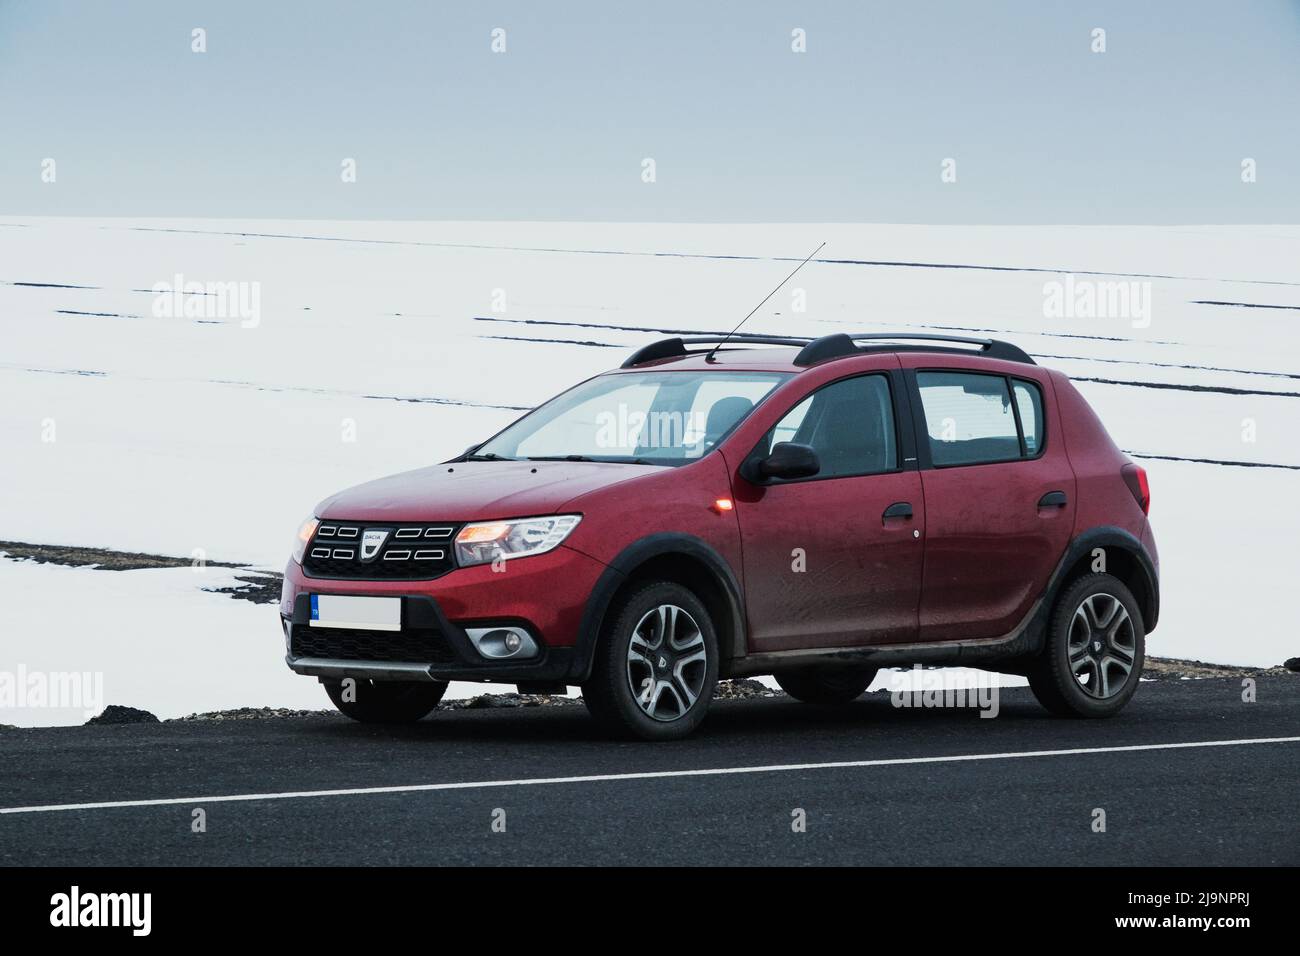 Kars, Turkey - February 25, 2022: Front and side view of a red colored Dacia brand Sandero model car paused on an asphalt road with a snowy background Stock Photo